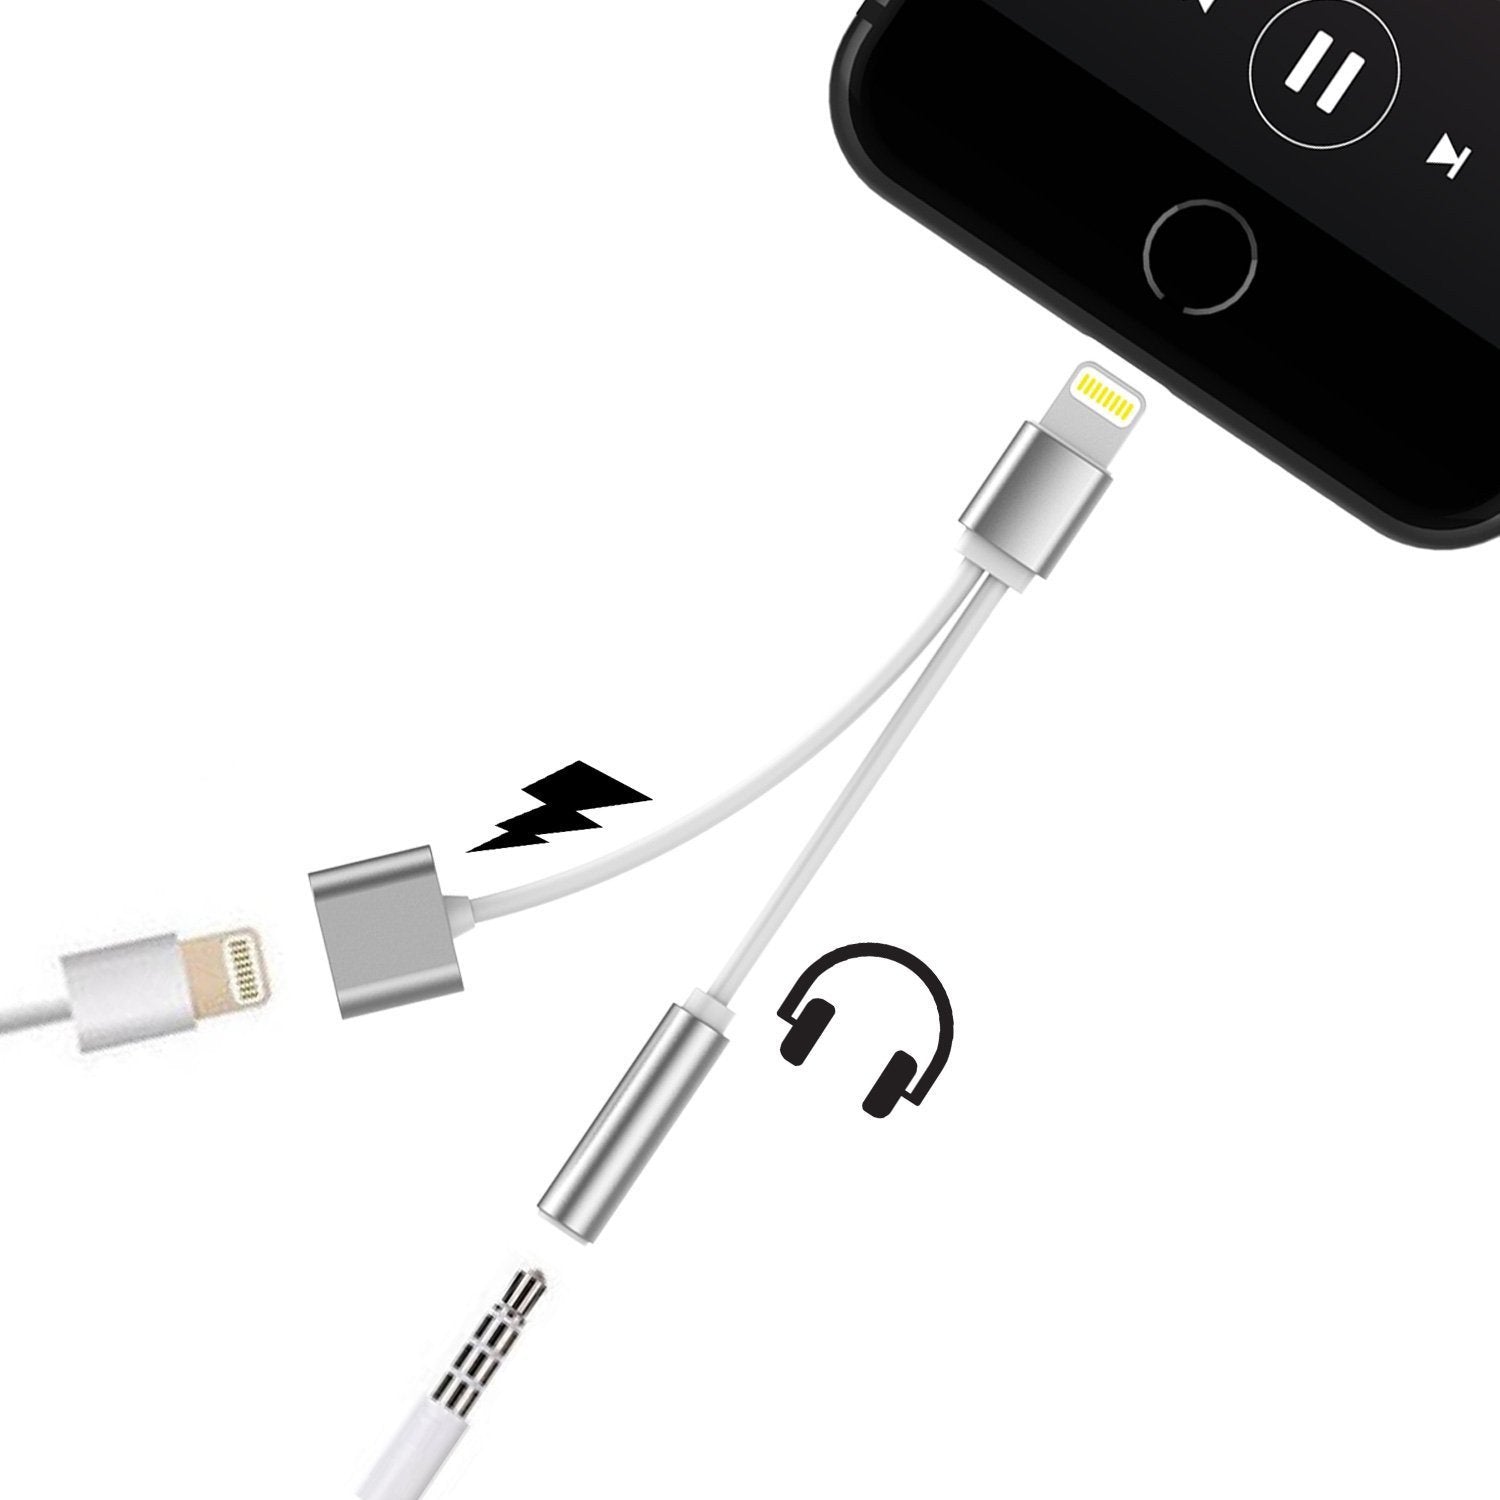 PUNKZAP Lightning Adapter Cable 2 in 1 Splitter Charger with 3.5mm Earphone AUX Jack|Charge & Listen to your Apple iPhone [SIlver] - PunkCase NZ